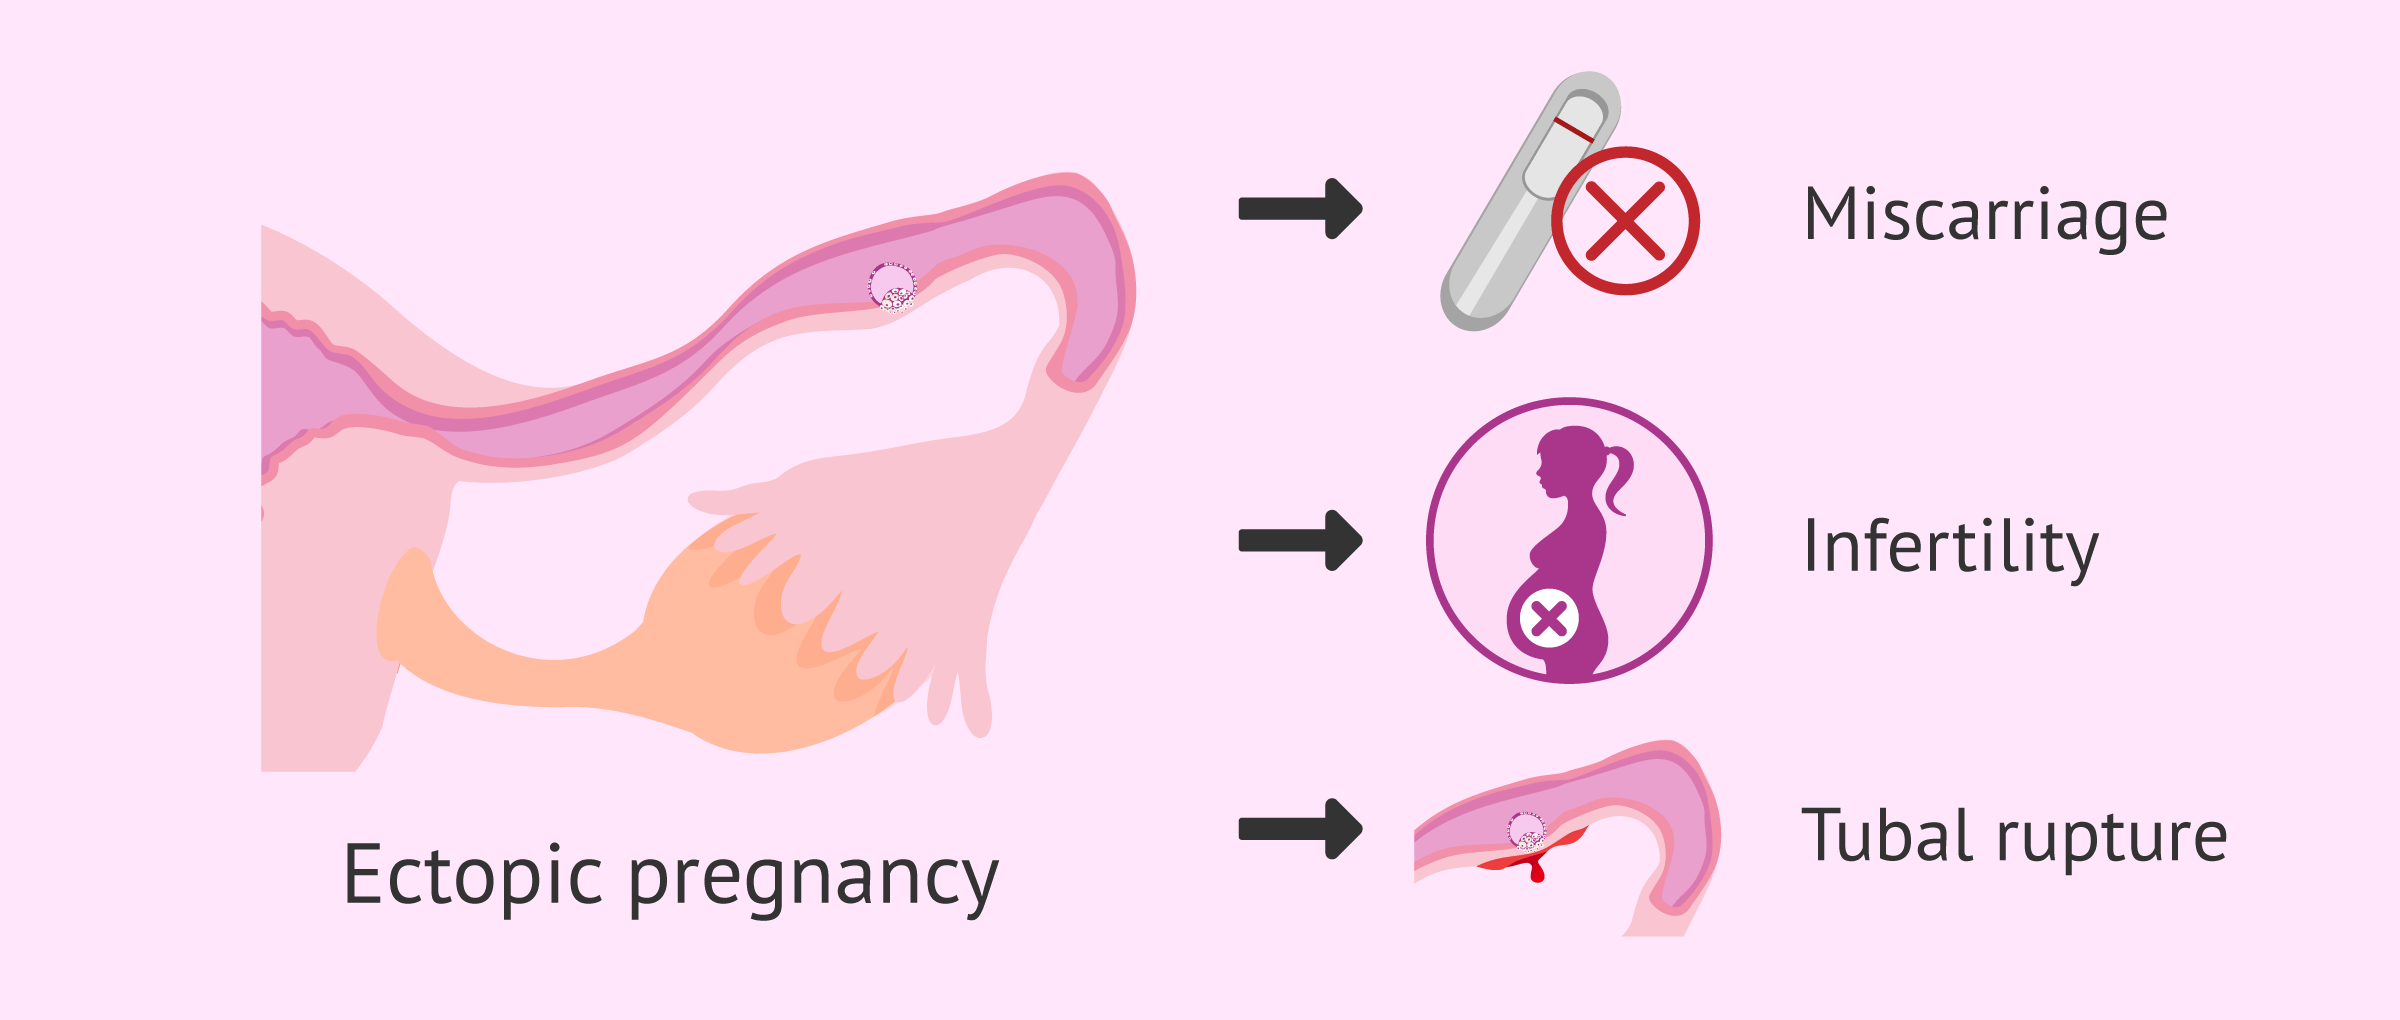 Consequences of ectopic pregnancy